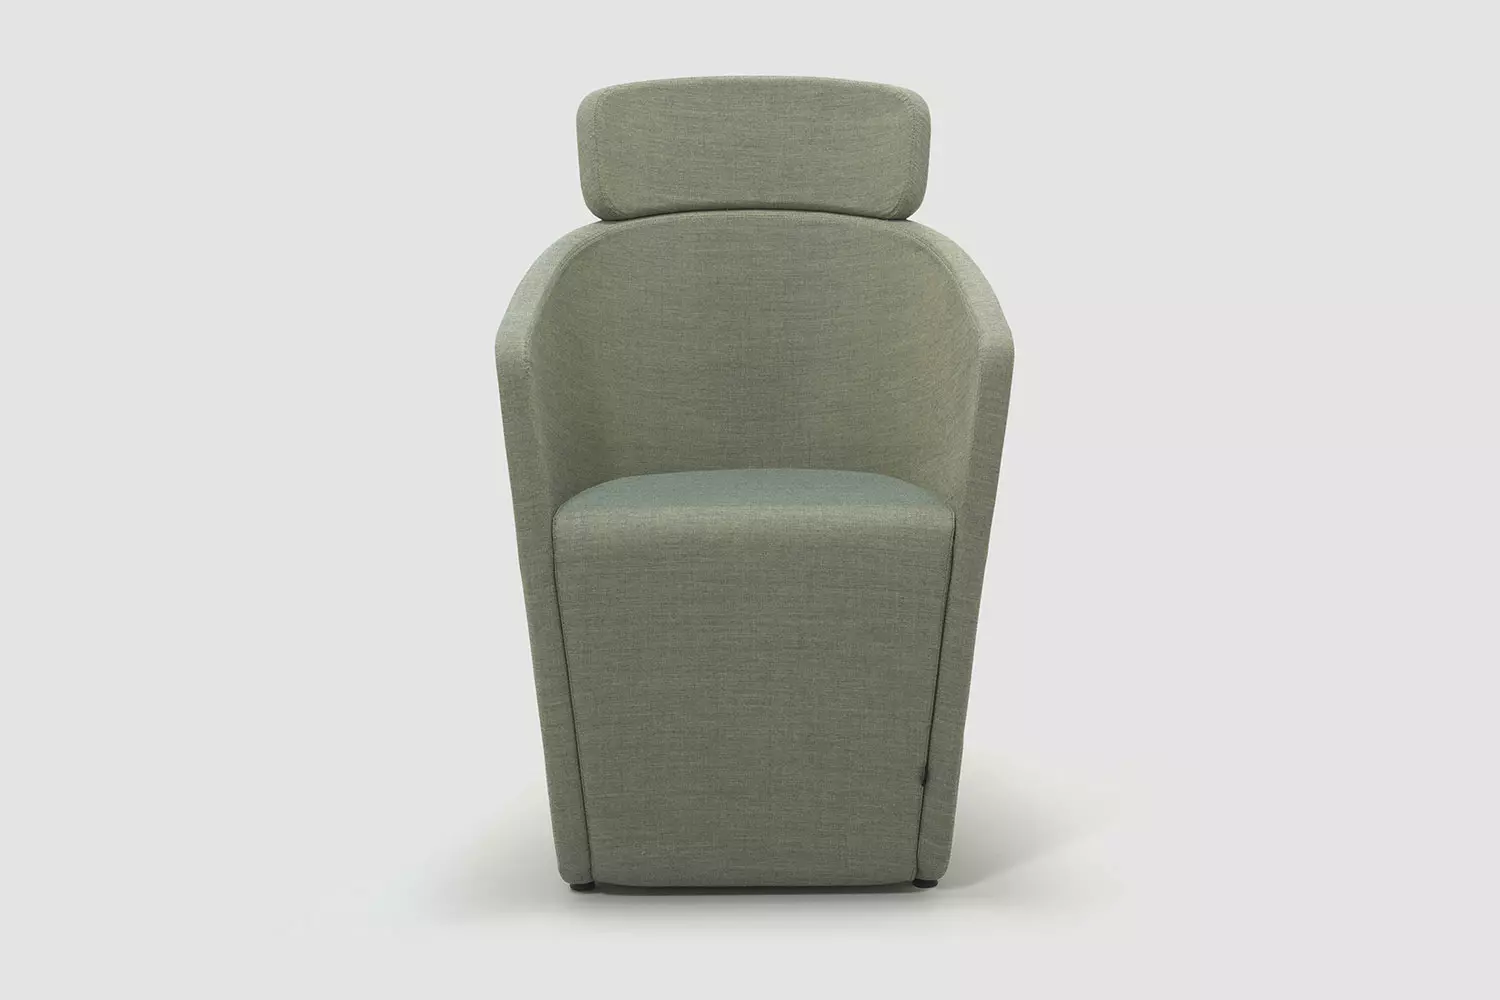 PARCS Club Chair, Upholstered Upholstered chair, Bene Office furniture, Image 1